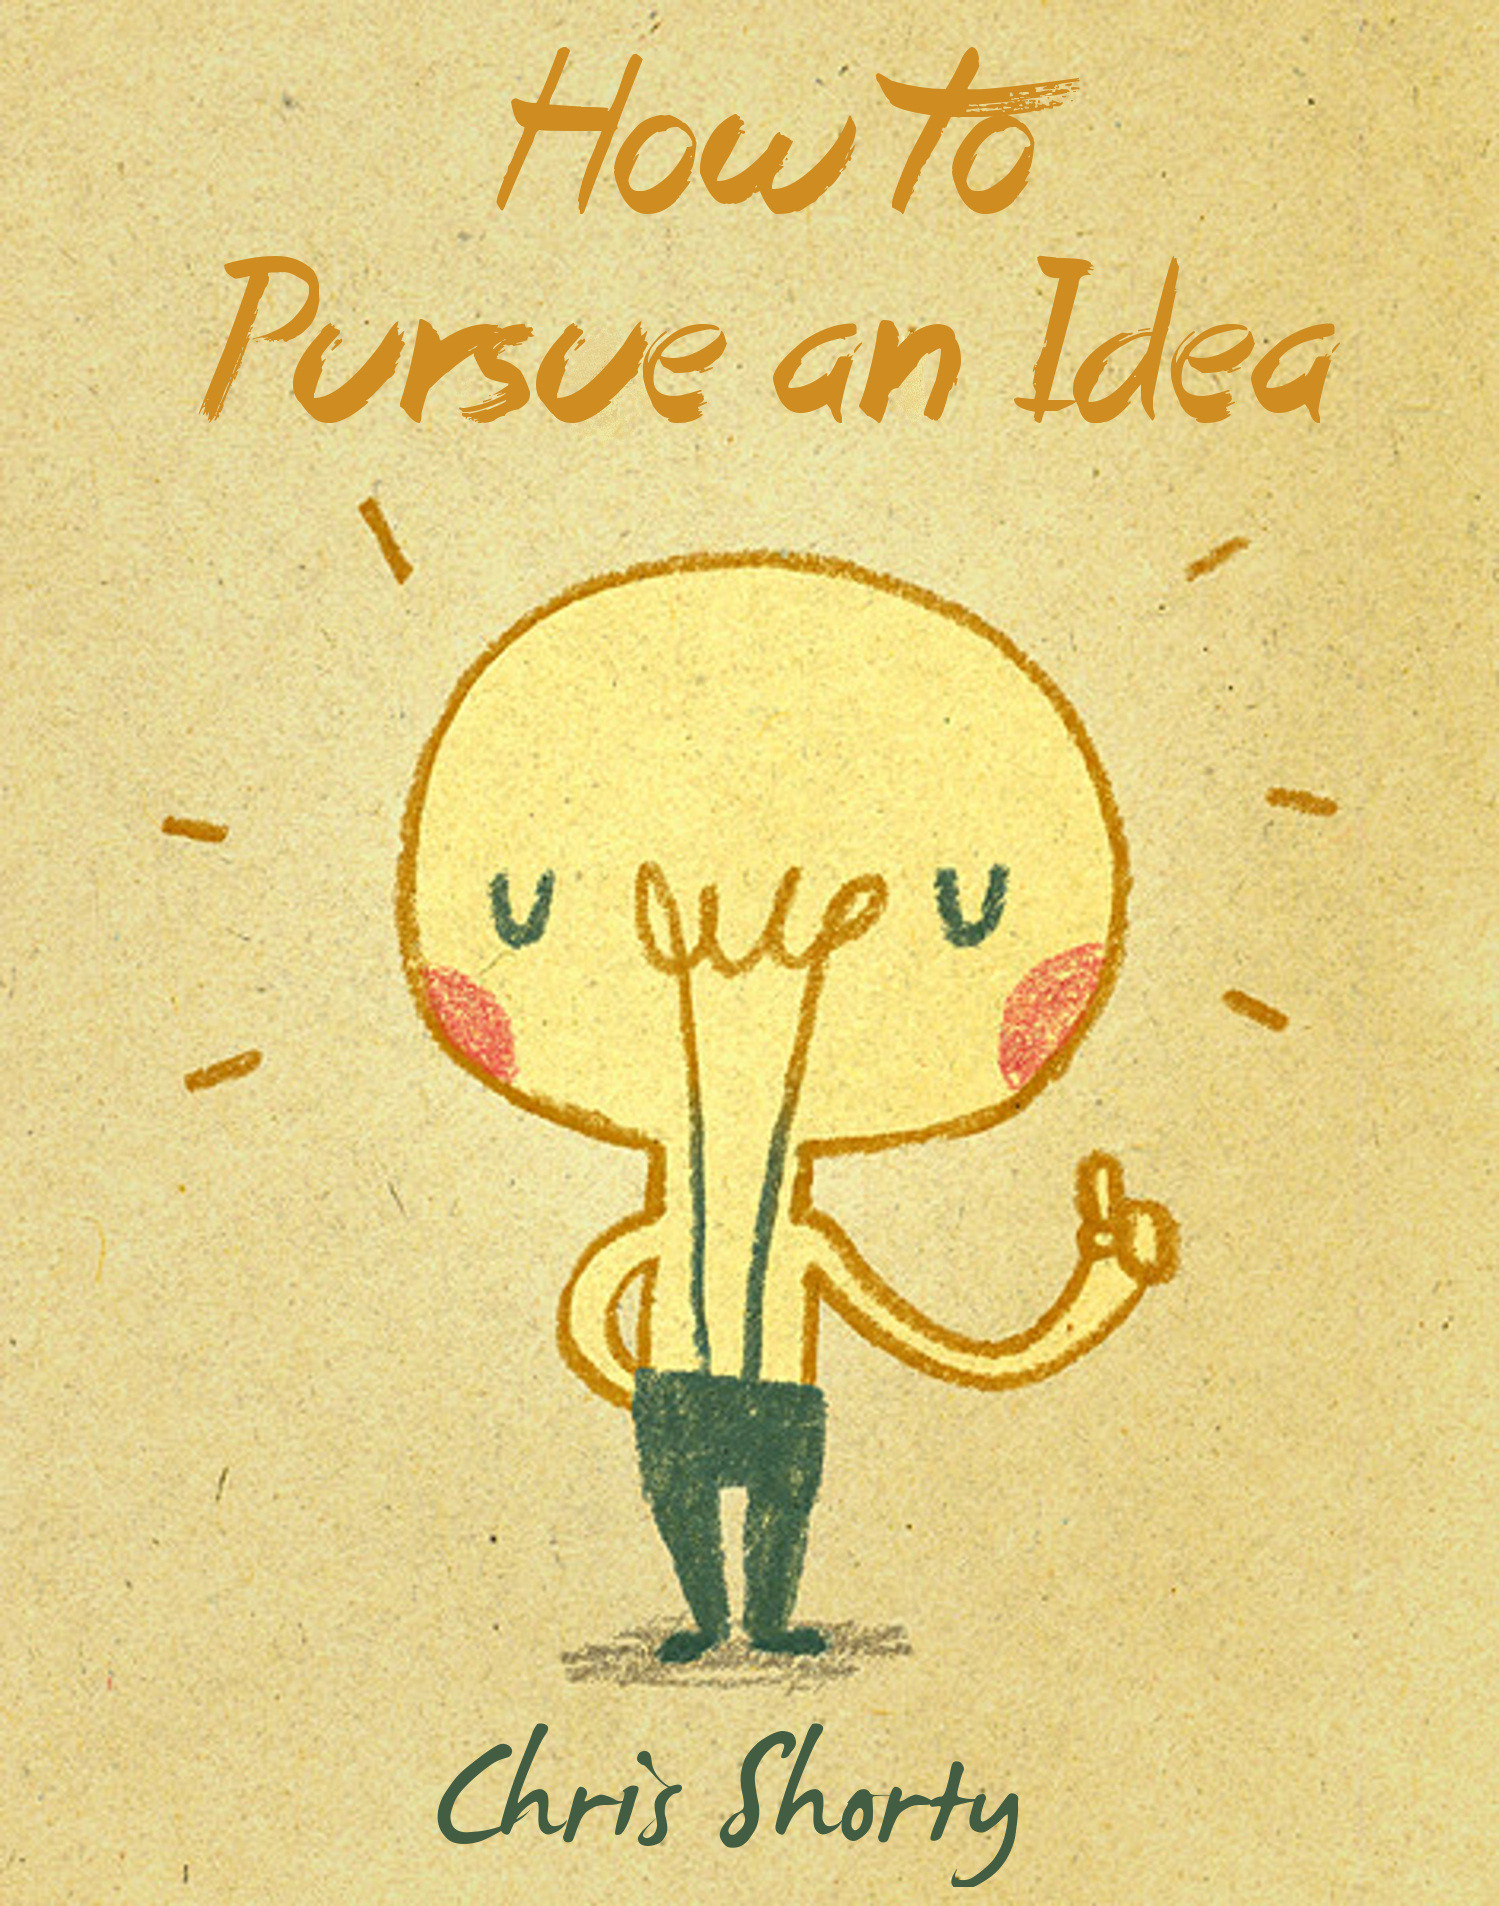 How to pursue an idea by Chris Shorty